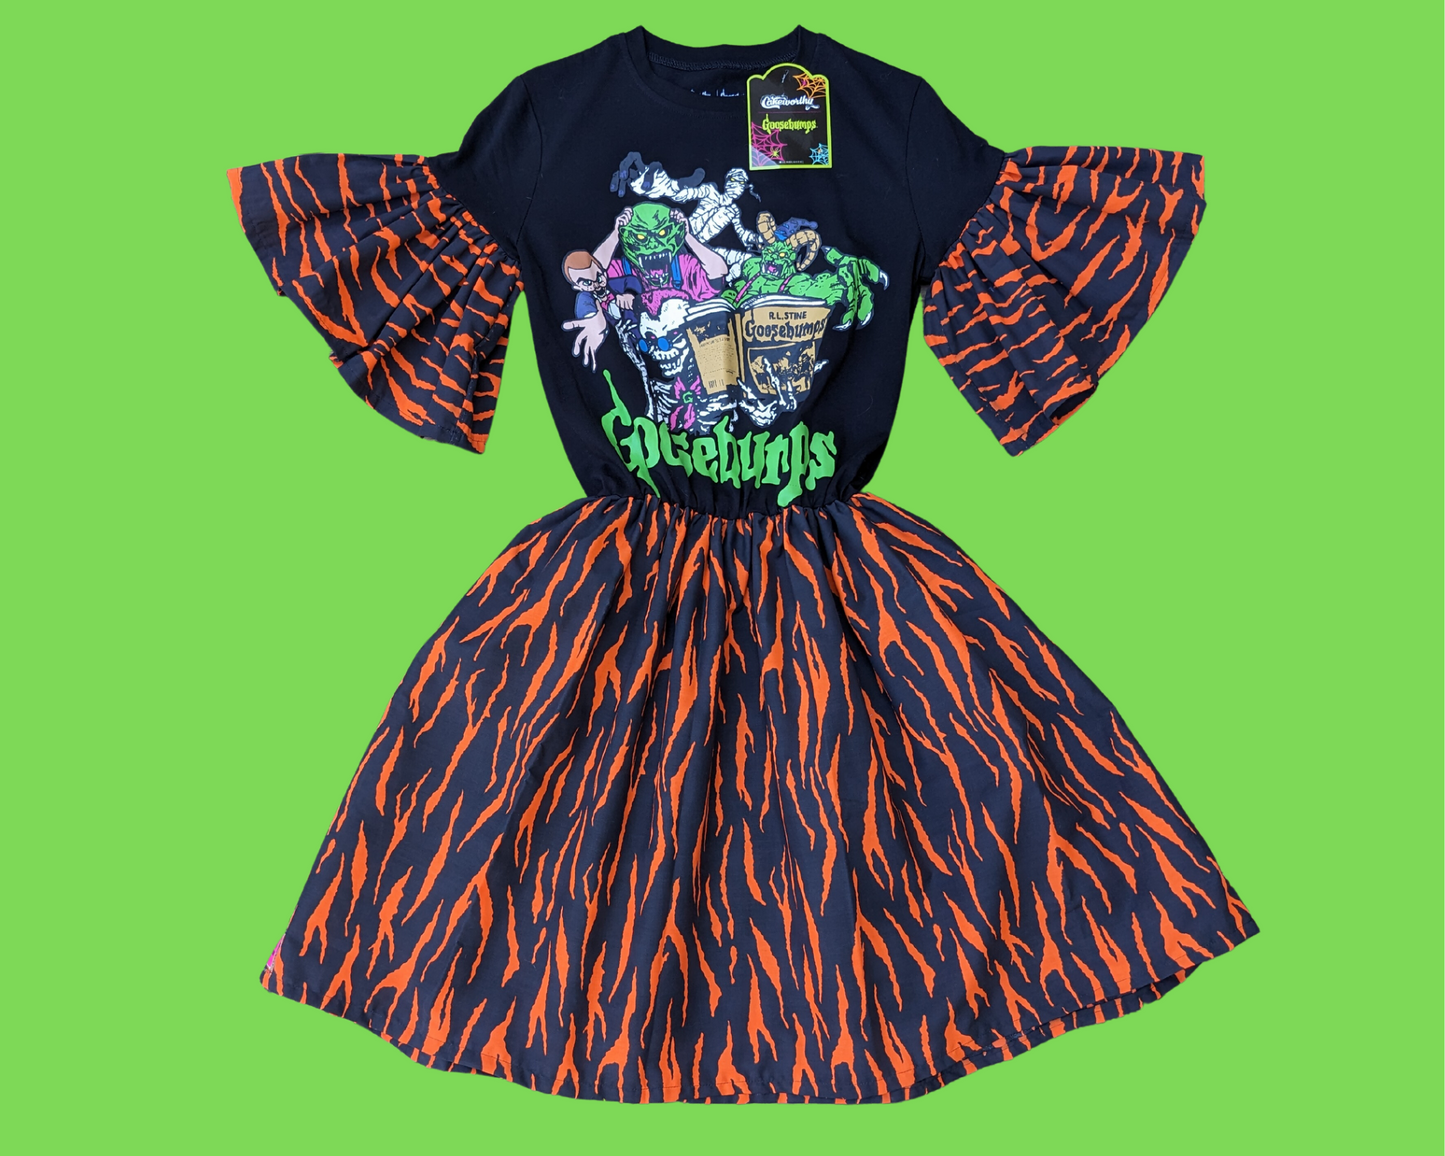 Handmade, Upcycled Goosebumps T-Shirt Dress from Cakeworthy (Brand New) with Orange and Black Fabric Size S